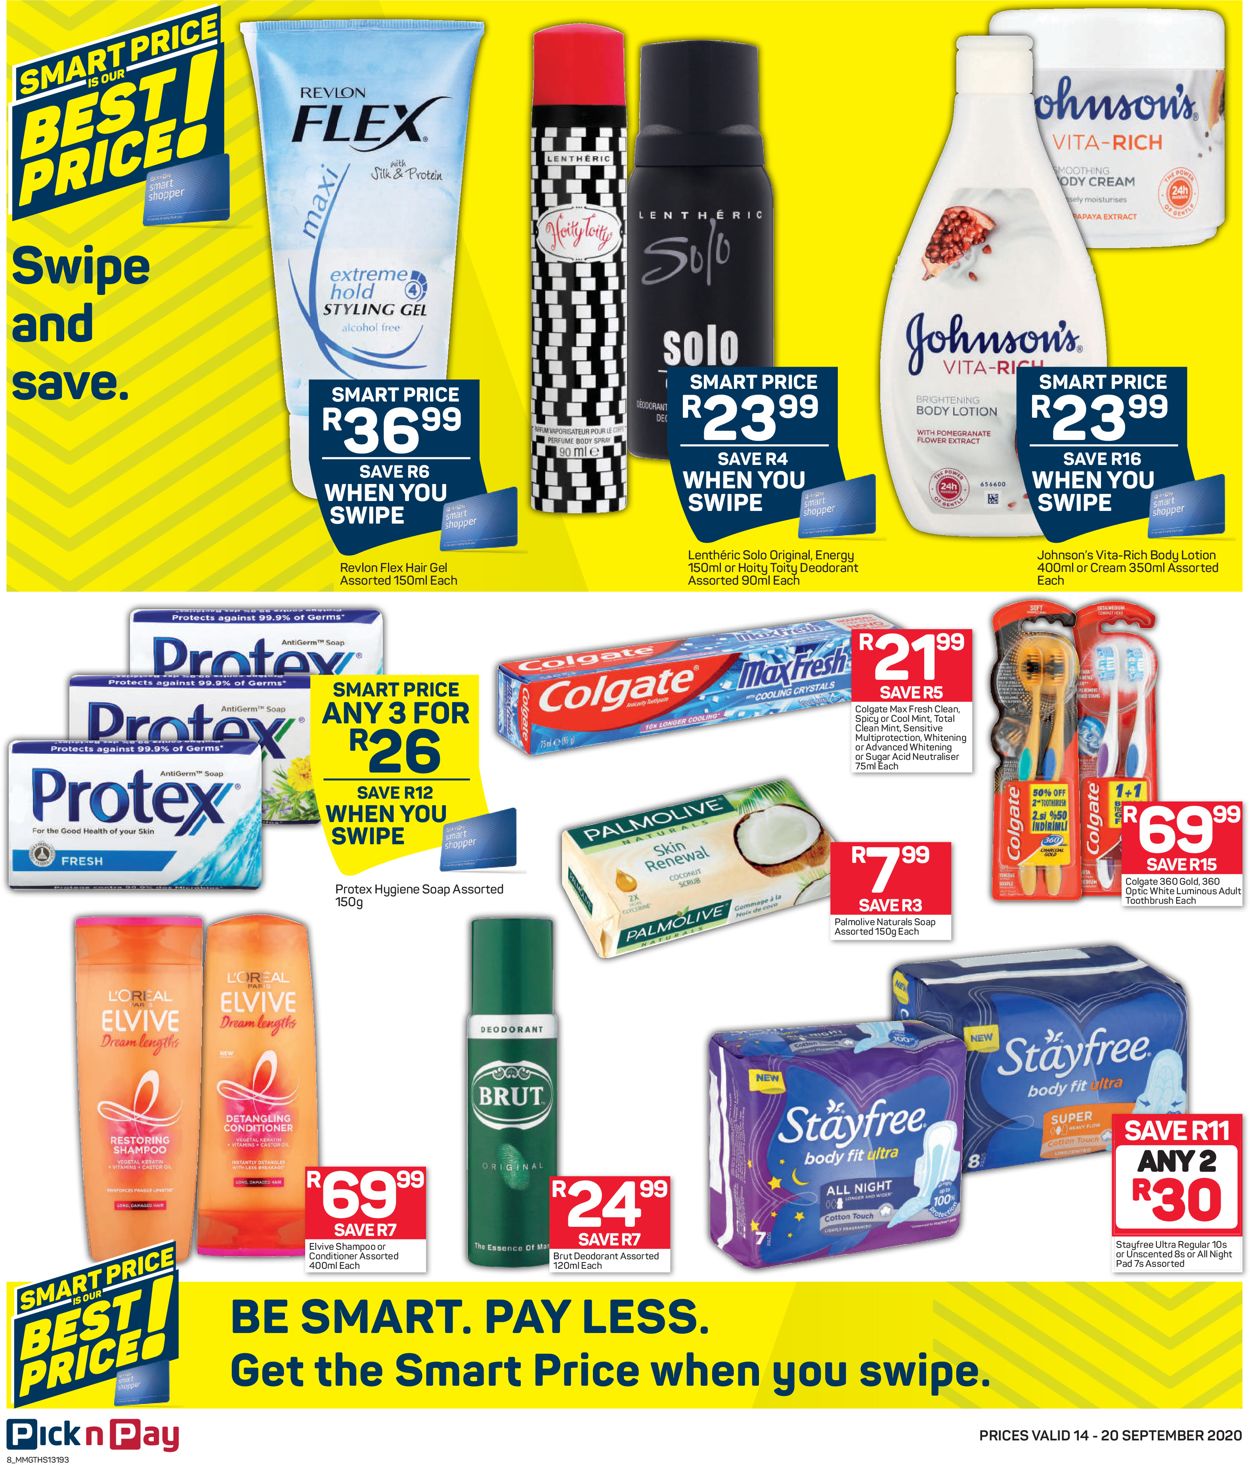 Pick n Pay Catalogue - 2020/09/14-2020/09/20 (Page 8)